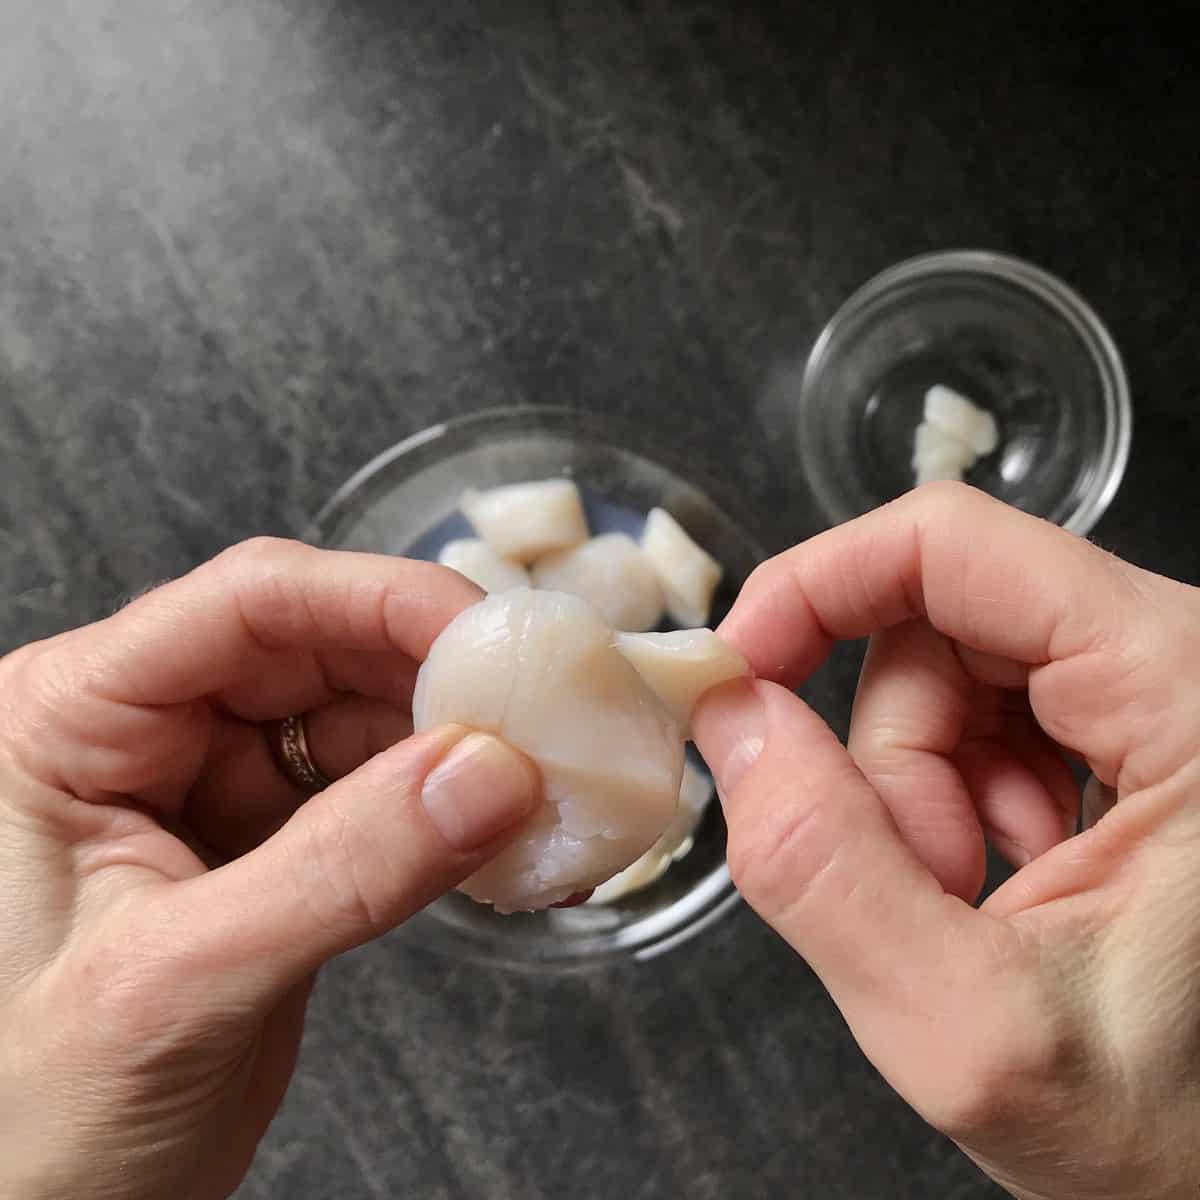 The side muscle of a scallop in the process of being peeled away.